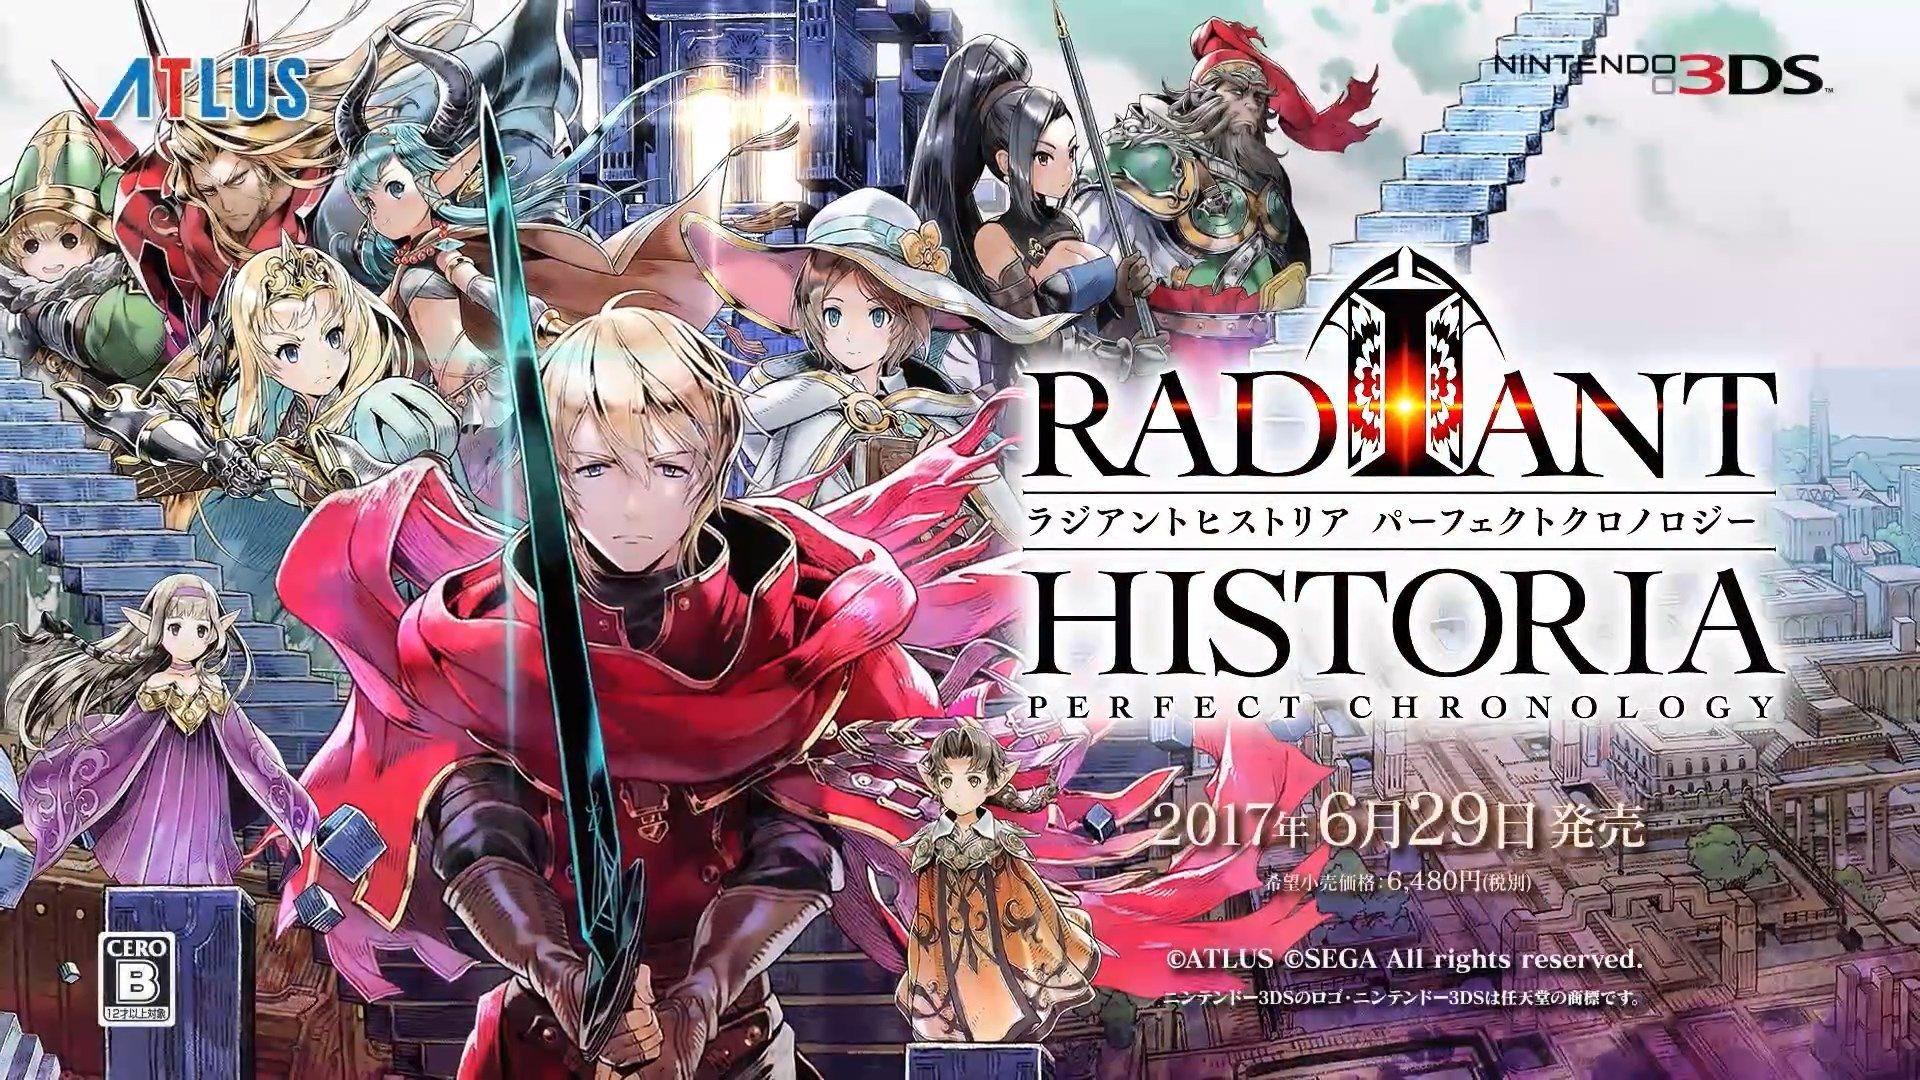 Radiant Historia: Perfect Chronology Gets Its First